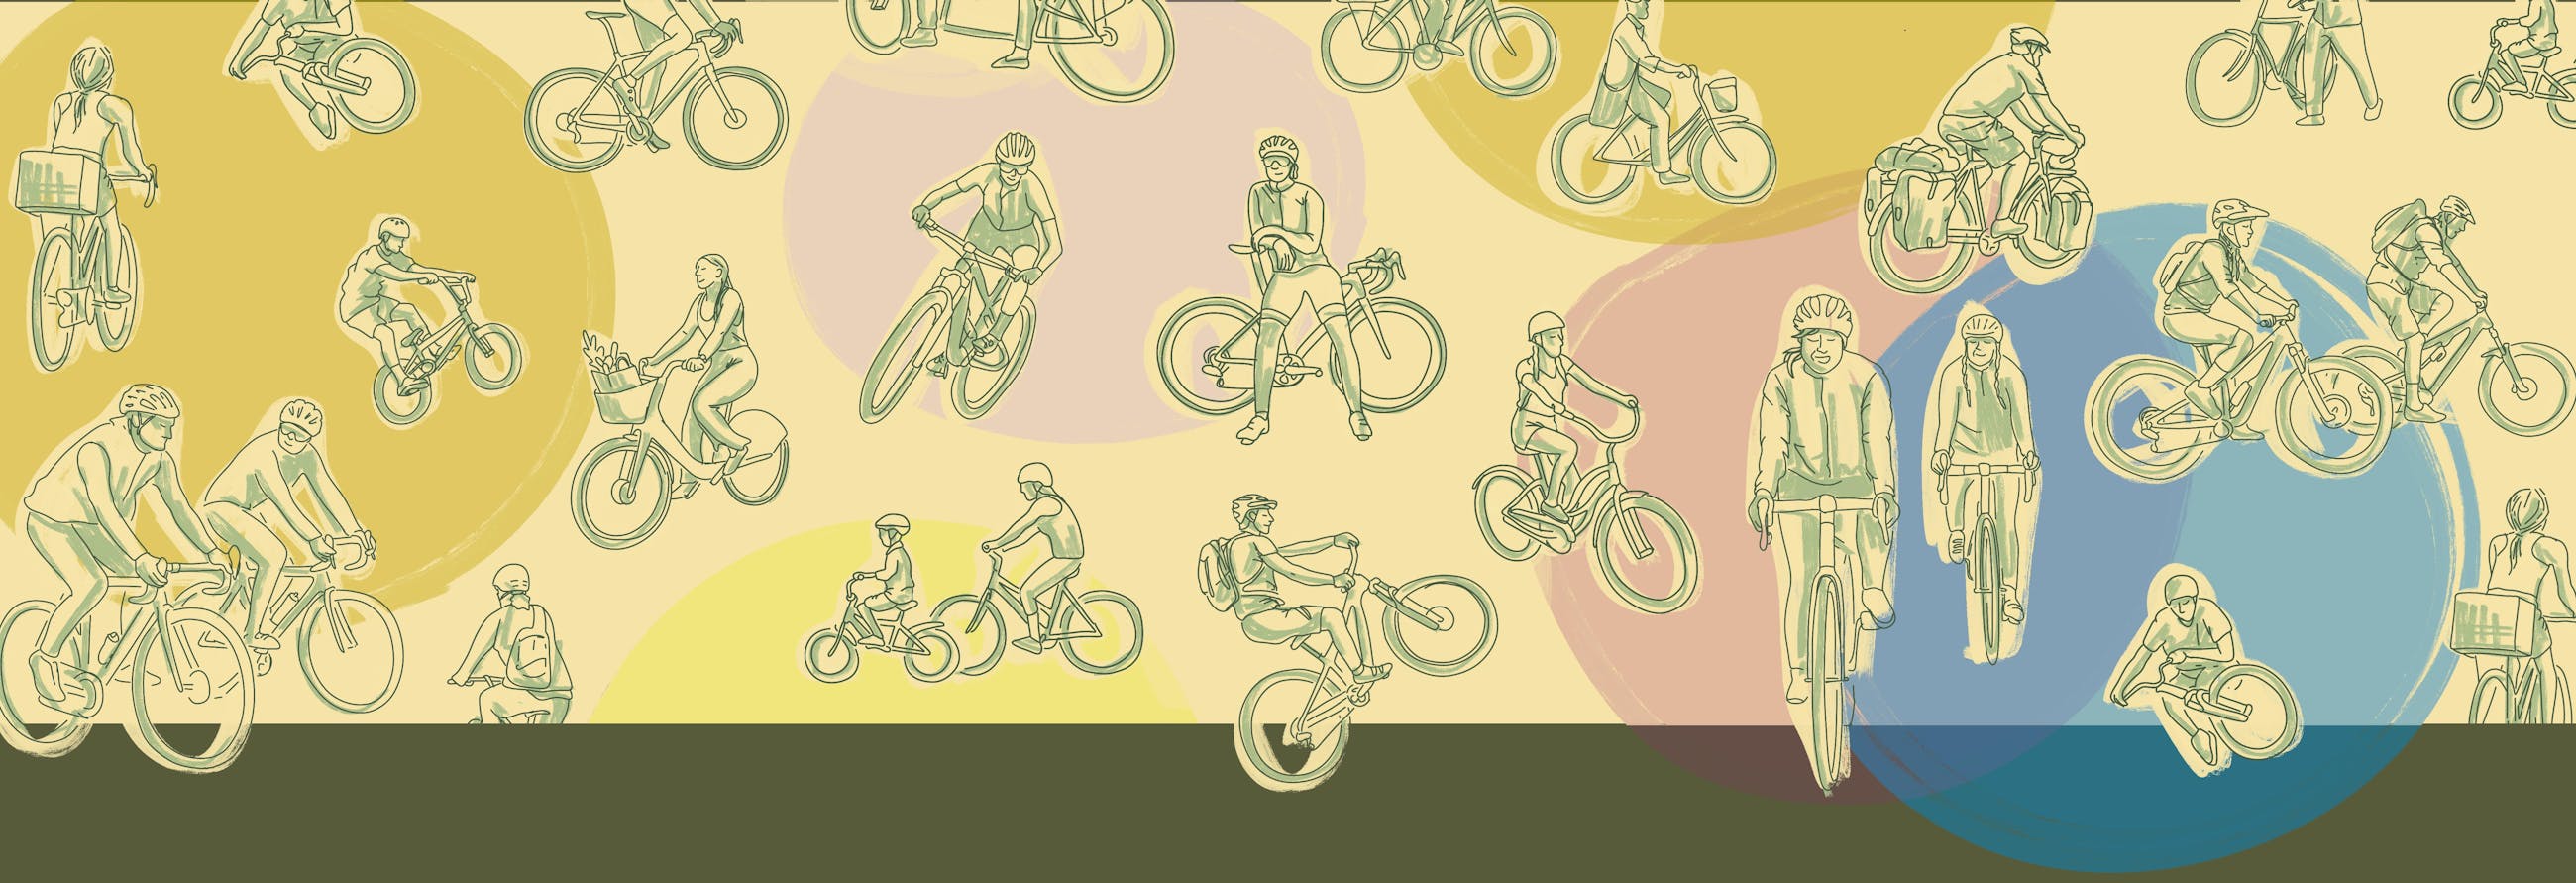 Collage of hand-drawn cyclists riding a variety of bikes 